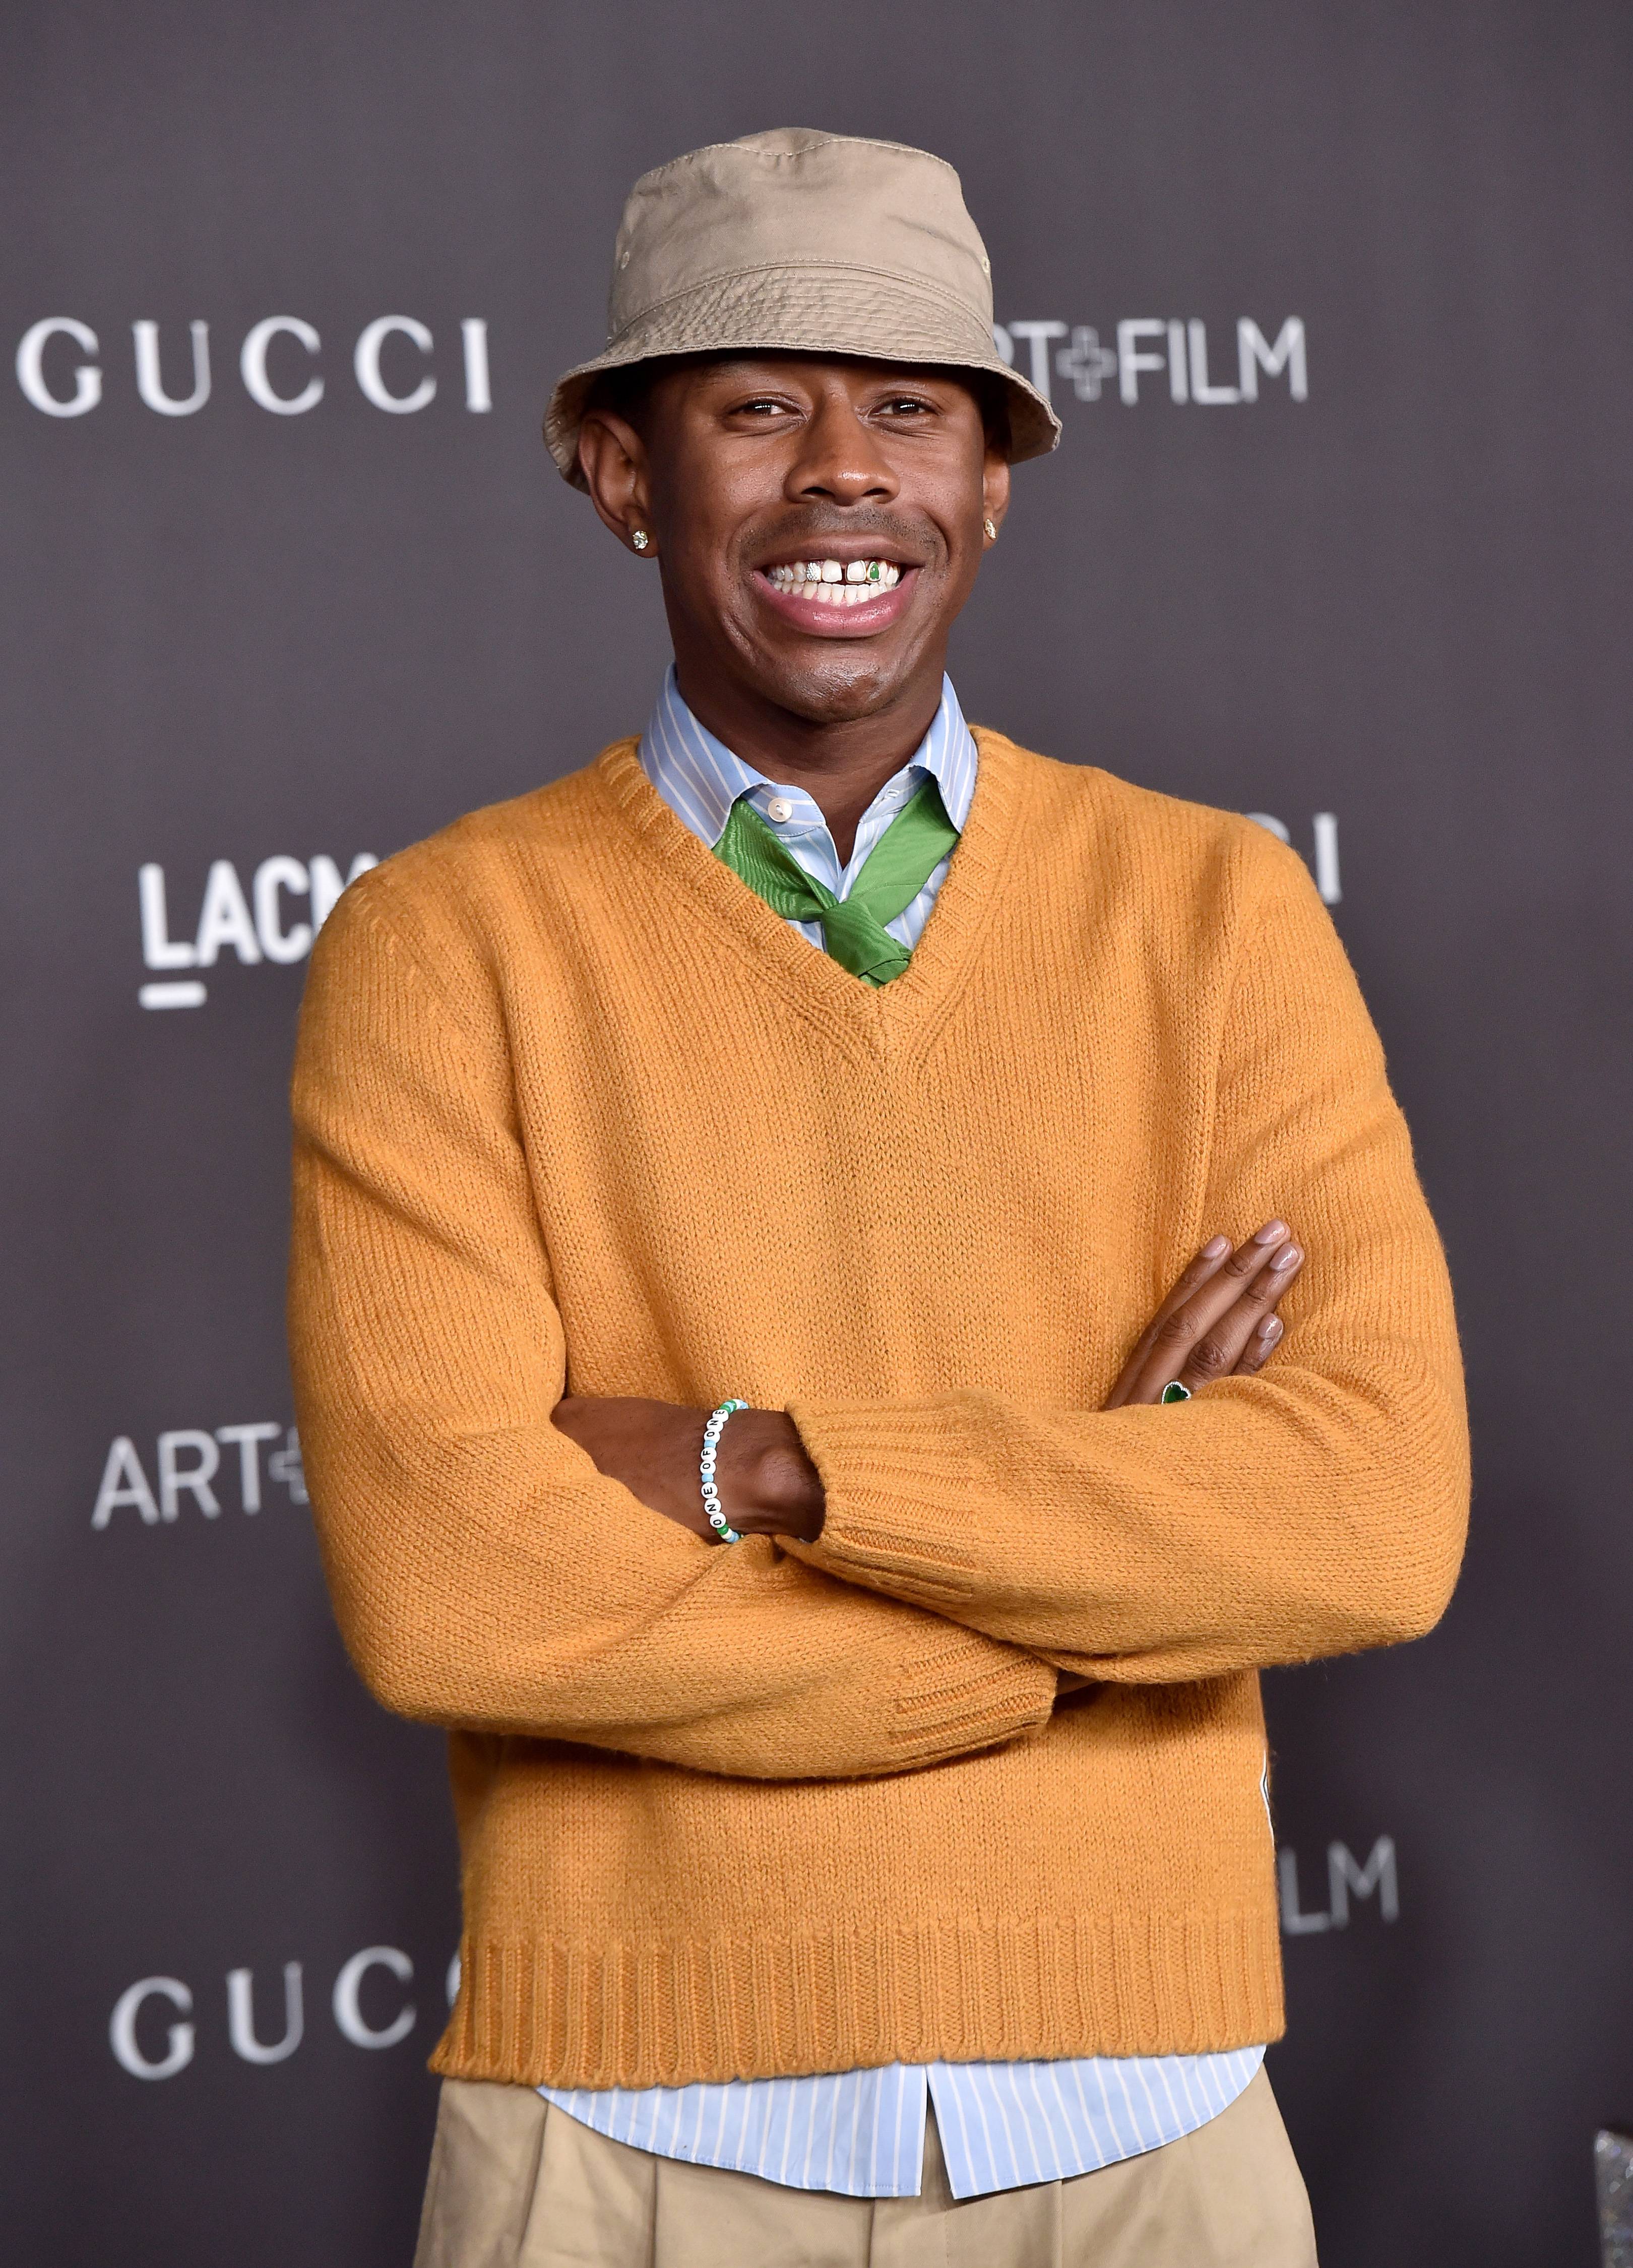 where can I get this neckerchief? : r/tylerthecreator